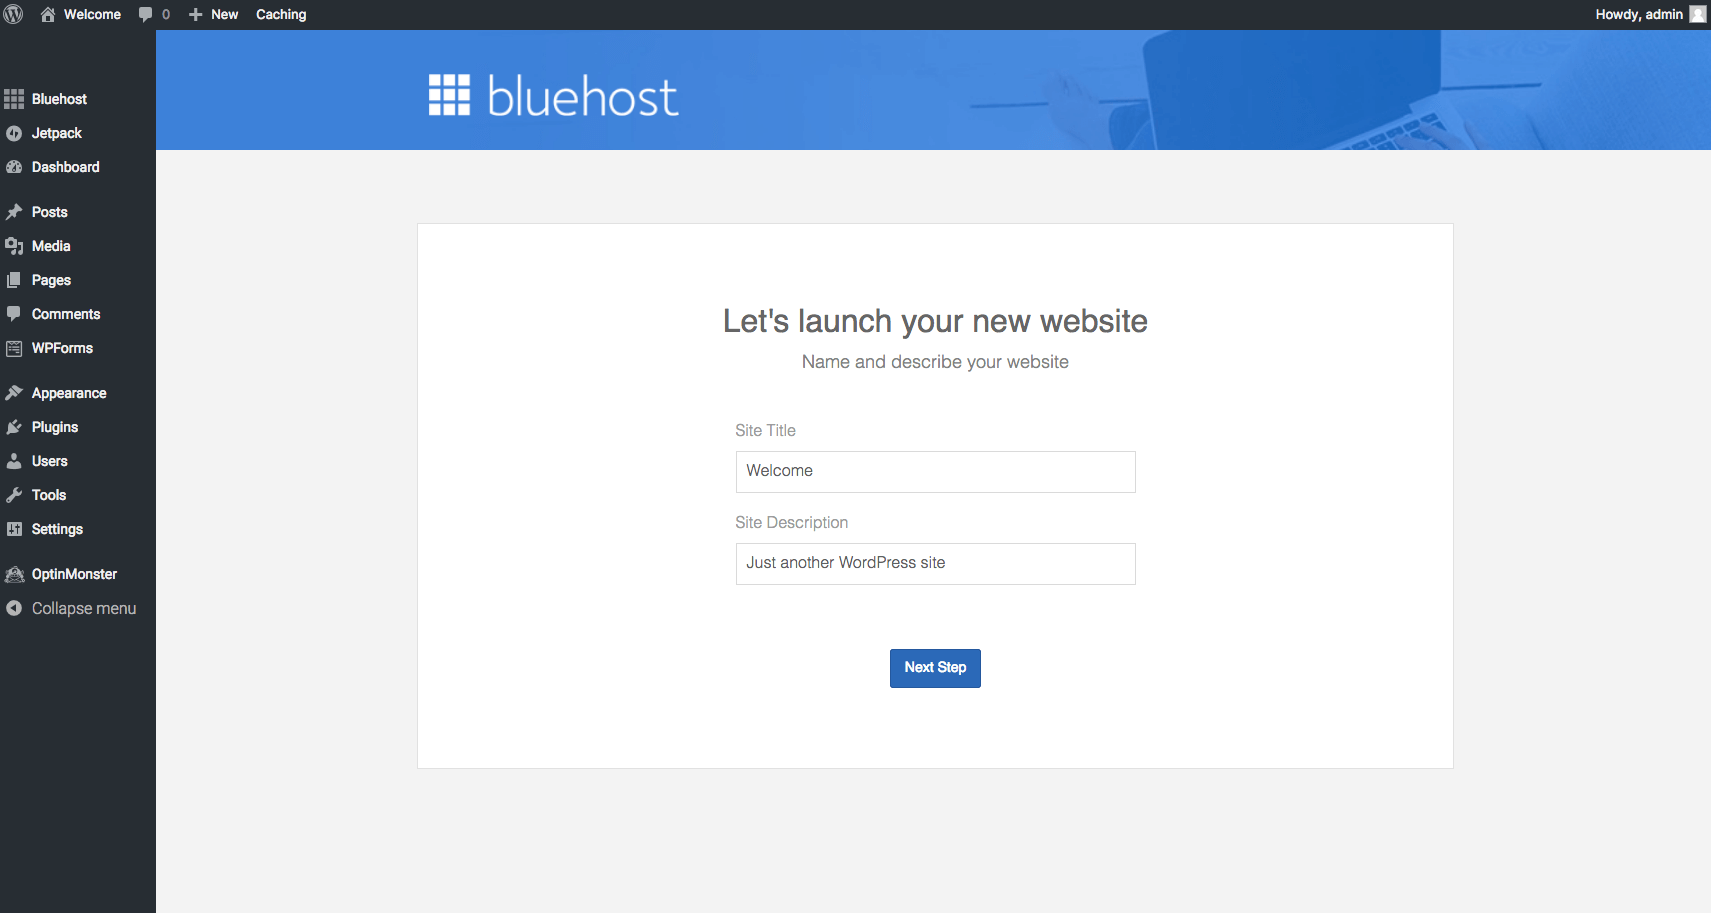 How to start a self-hosted WordPress blog with Bluehost - Step 2.13: Name your website